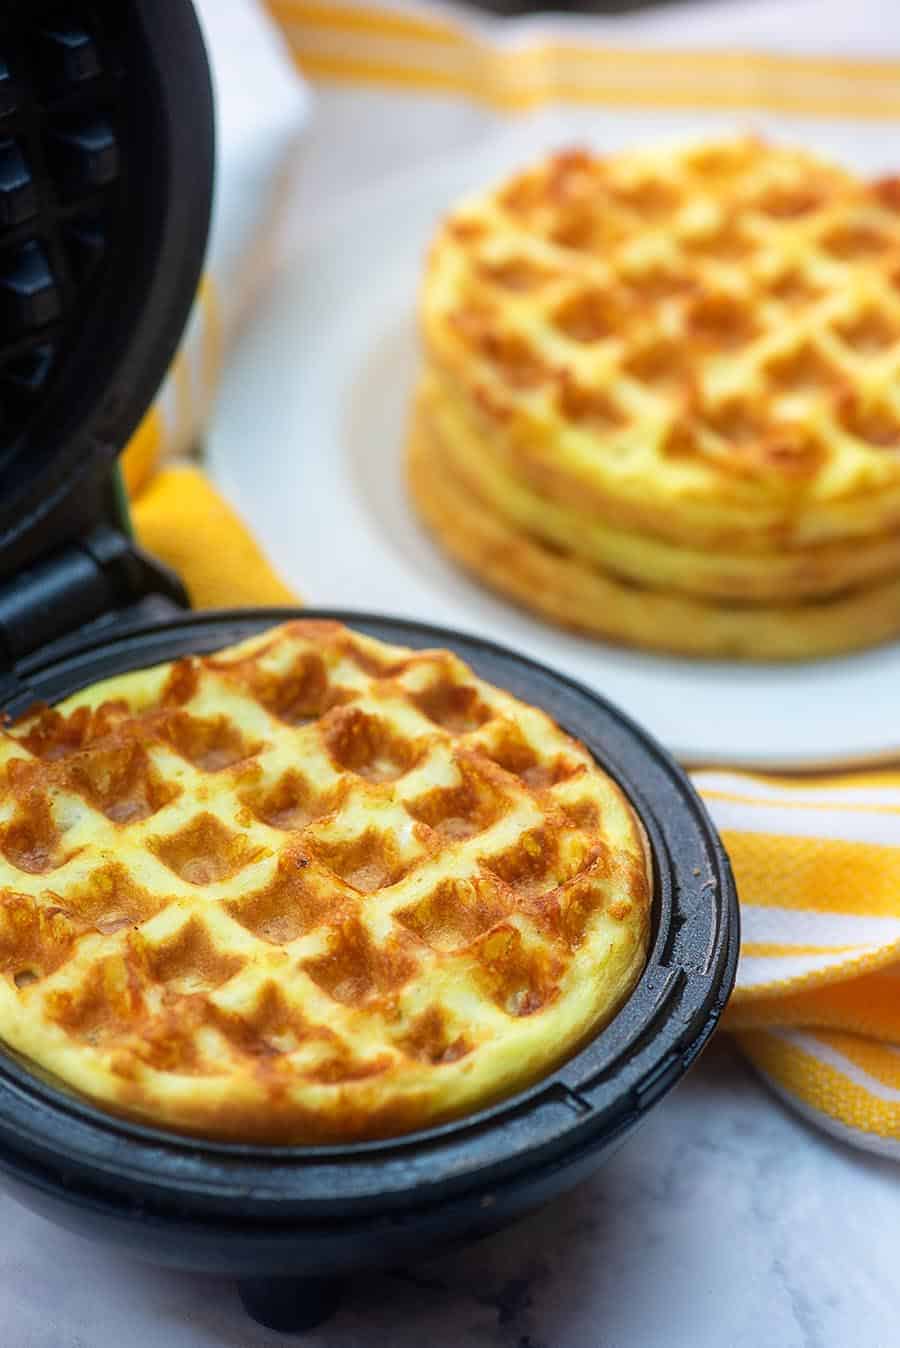 A chaffle in a mini waffle iron in front of a plate of stacked chaffles